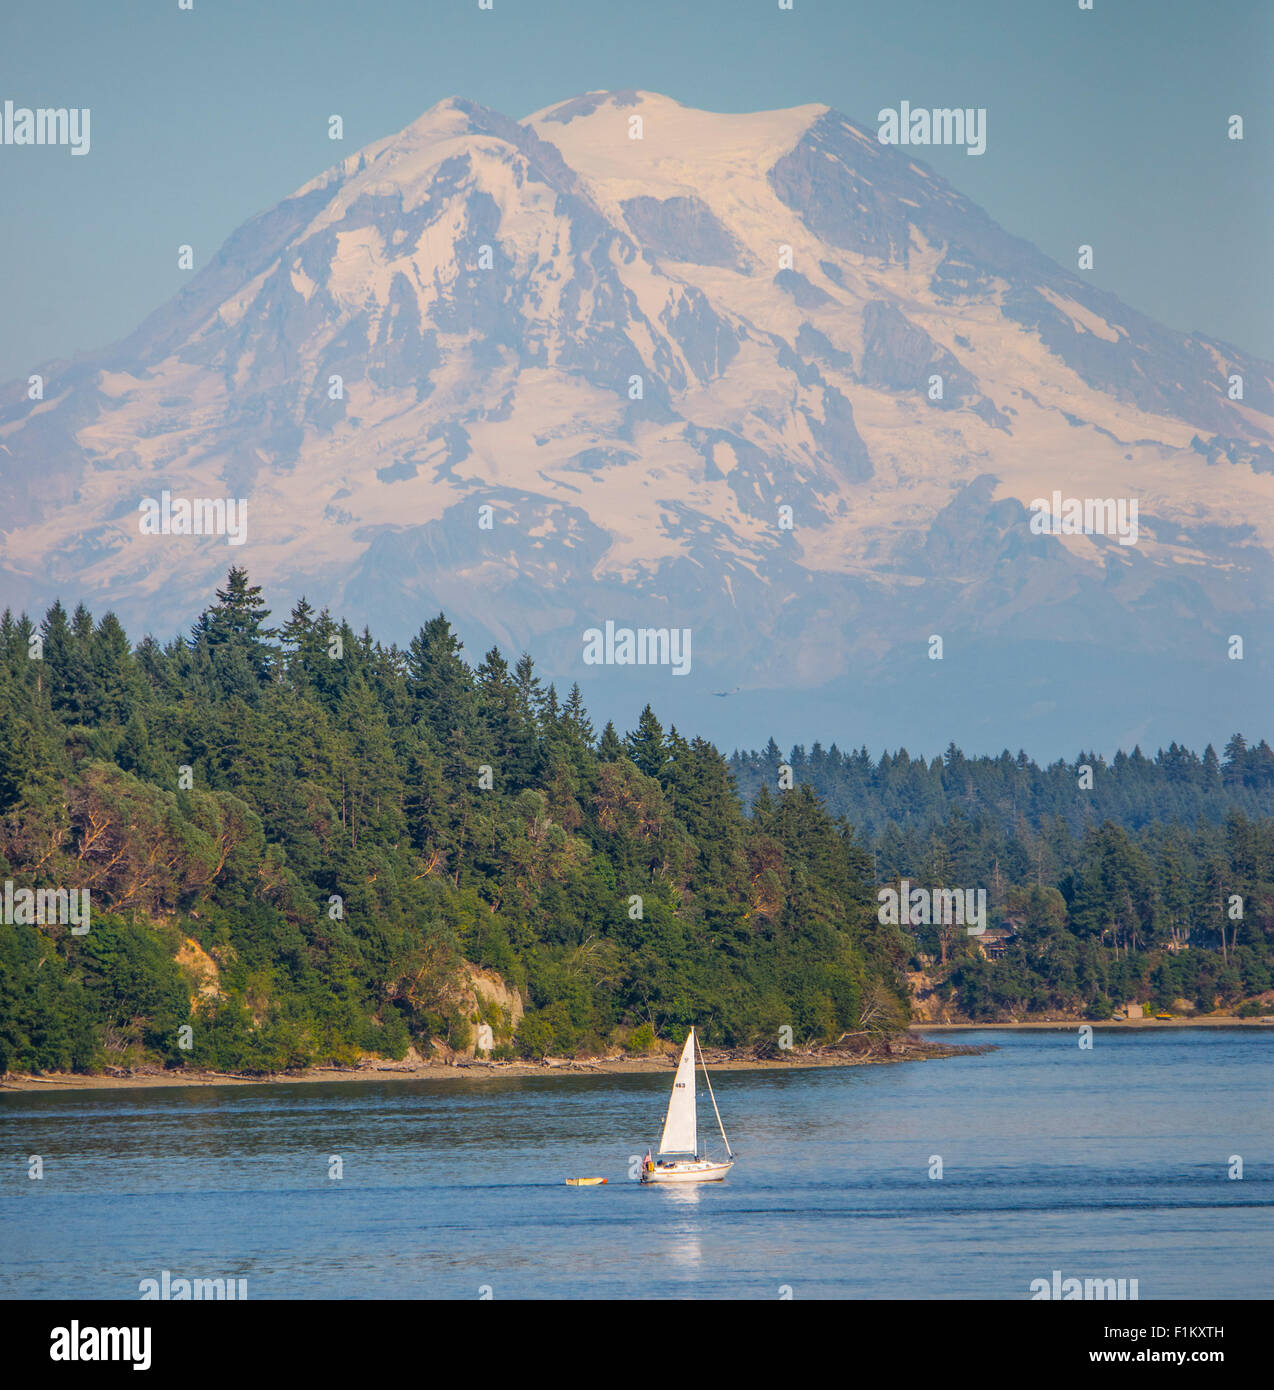 Scenic close-up of Mount Rainier with people sailing a sailboat. Puget Sound, Squaxin Island, Washington State. Stock Photo